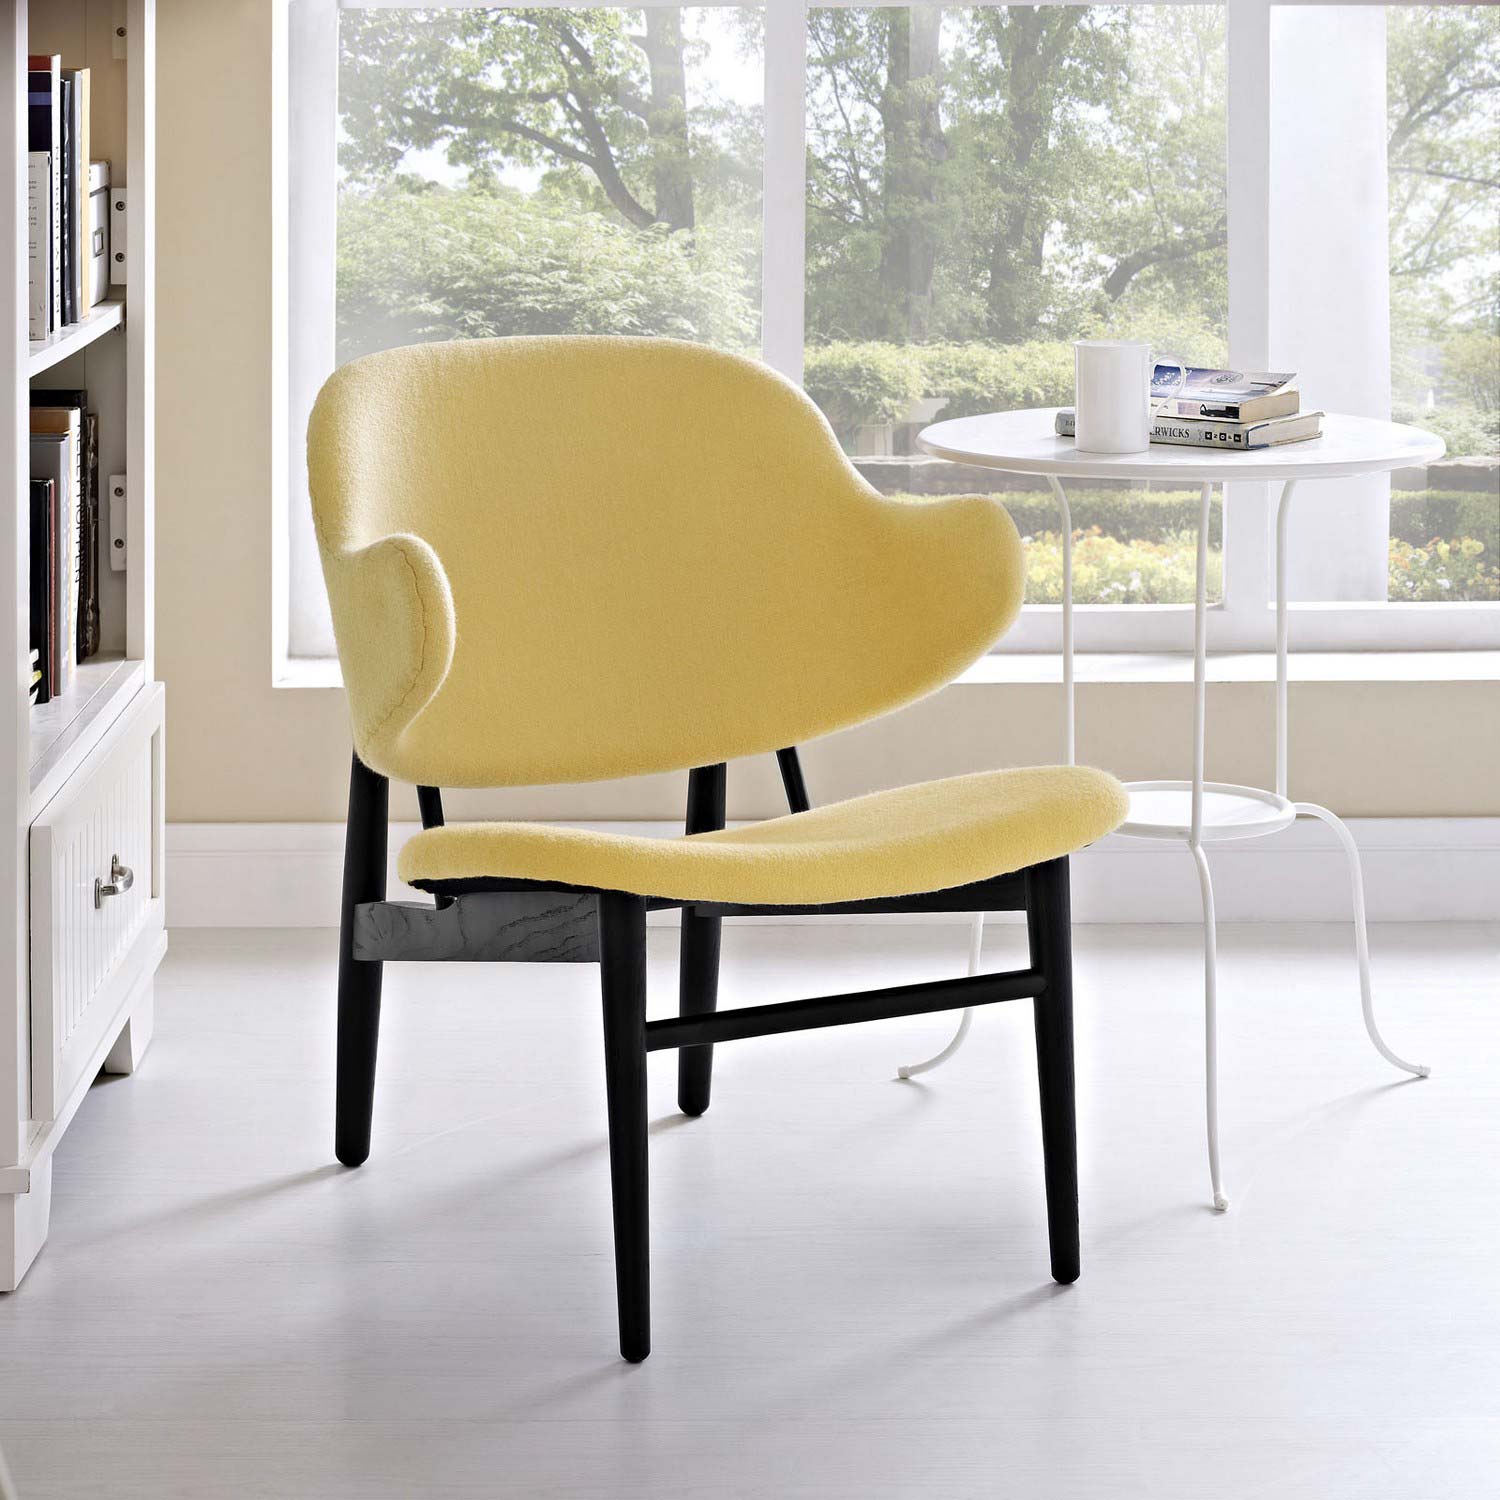 Modway Suffuse Lounge Chair - Black/Yellow